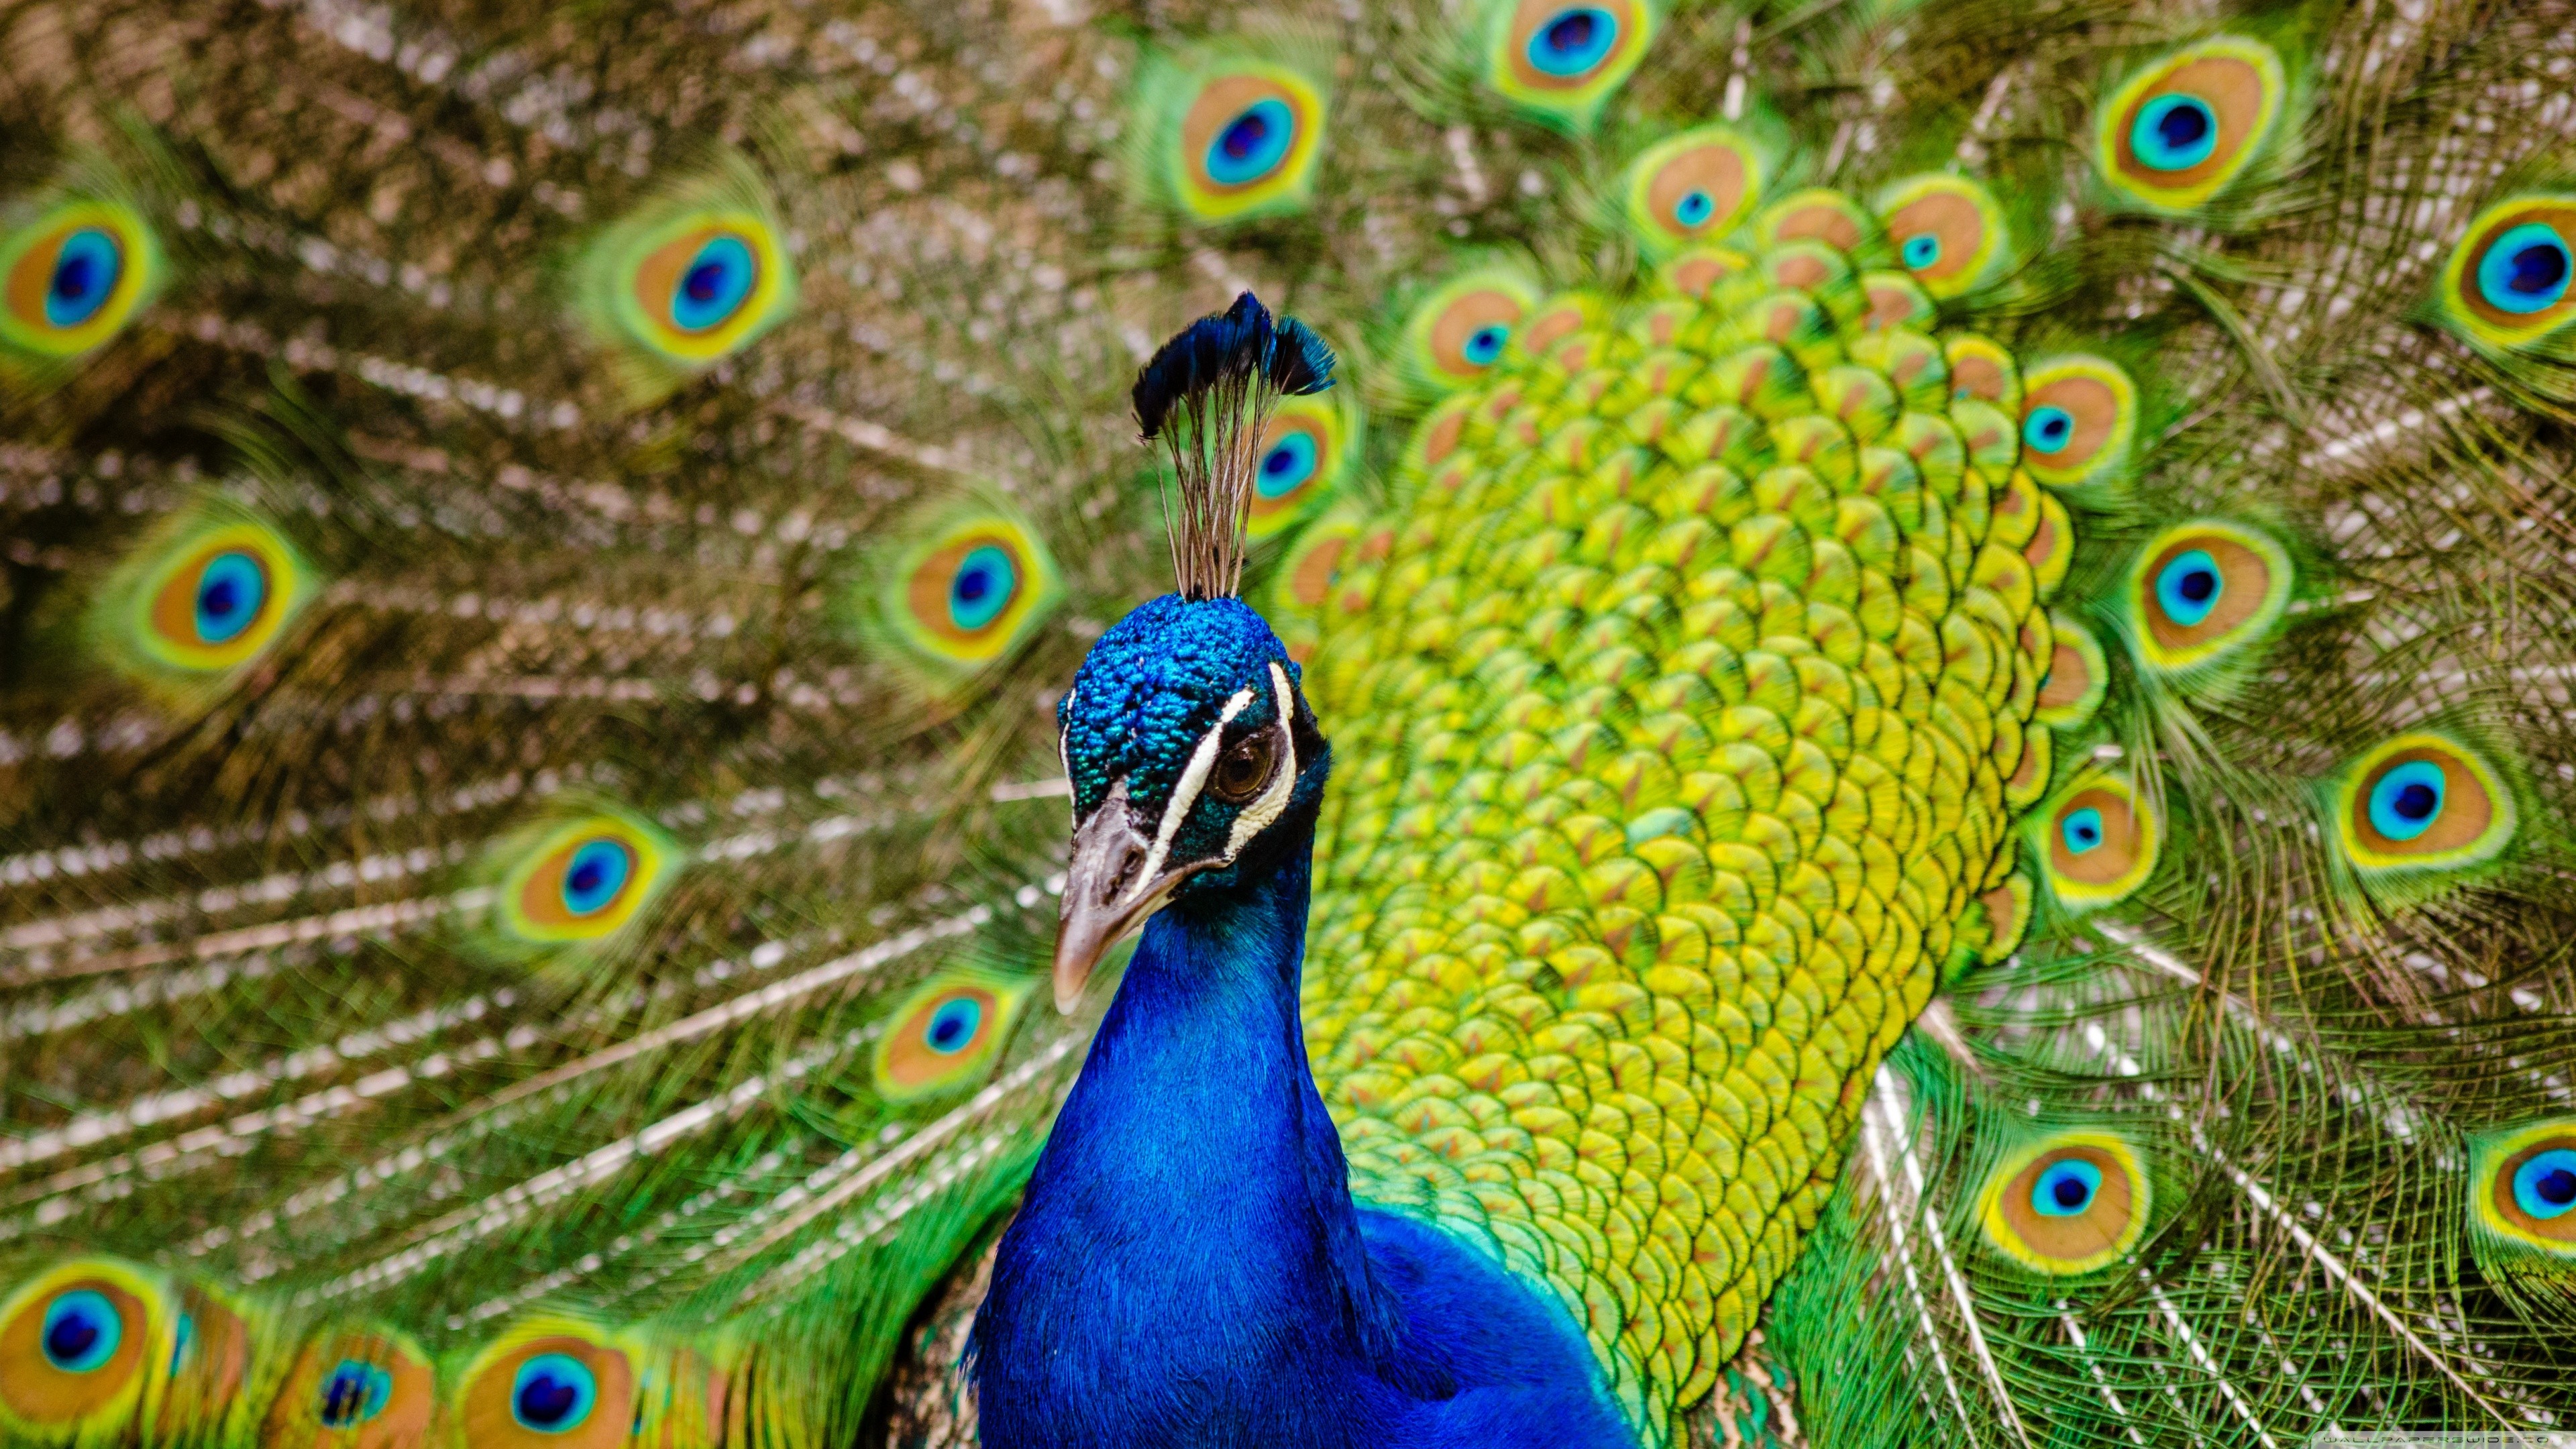 Peacock Wallpaper Stock Photos Images and Backgrounds for Free Download